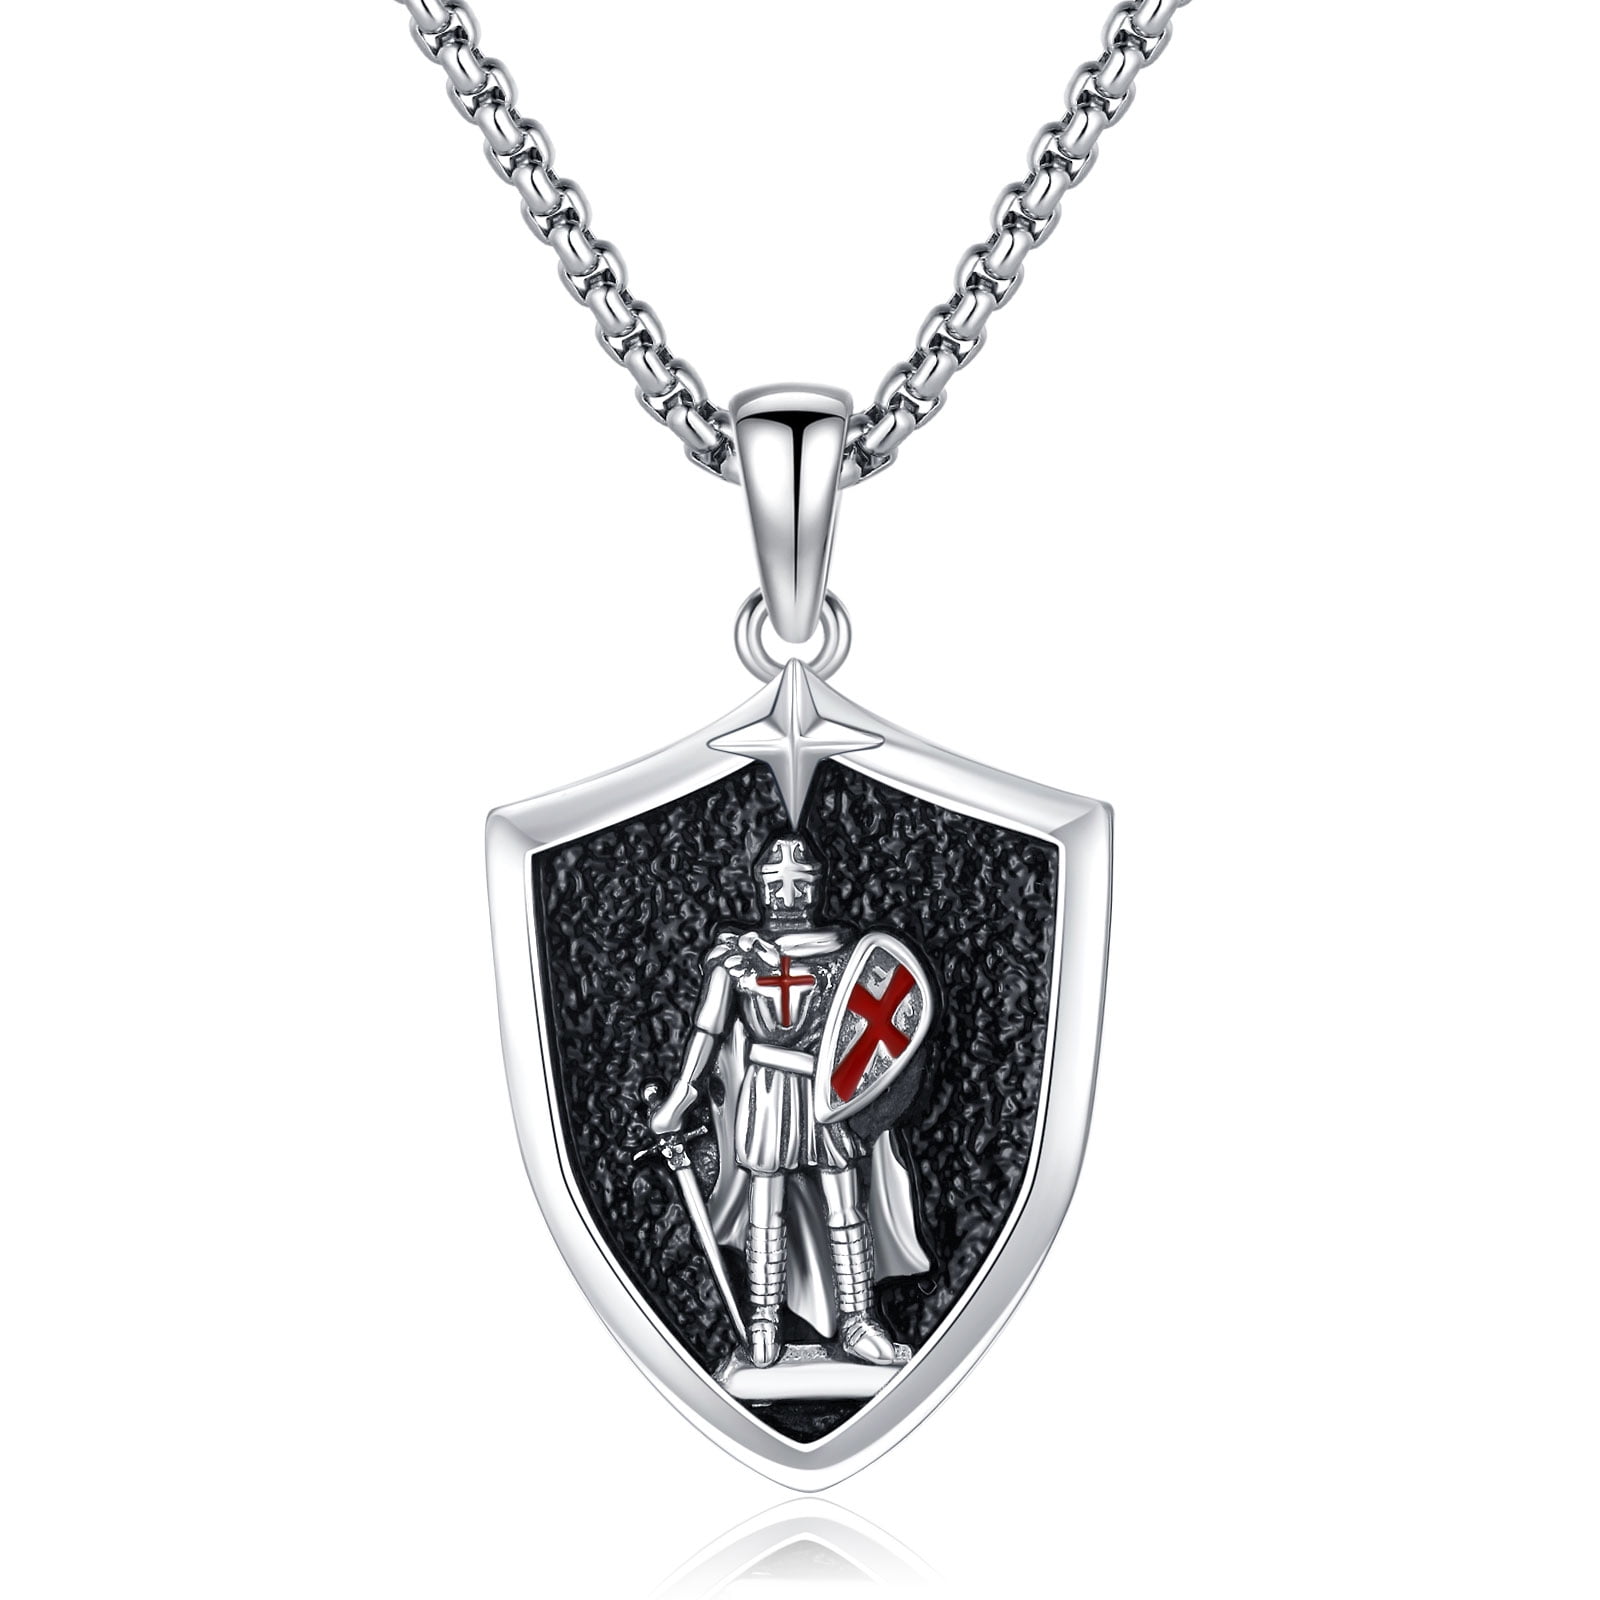 WINNICACA Crusaders Templar Knights Pendant Necklace for Men Sterling ...